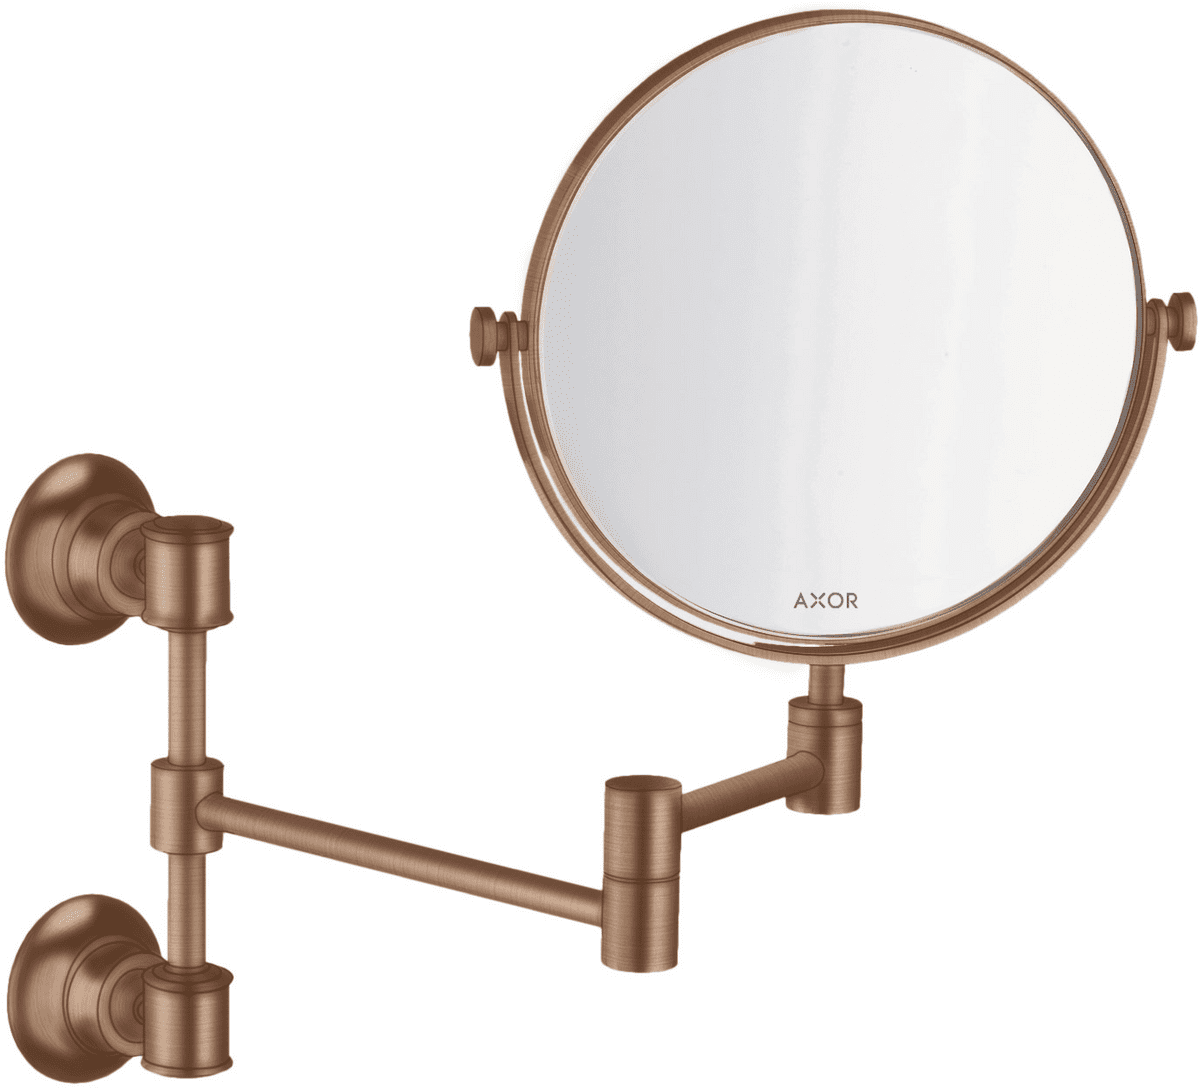 HANSGROHE AXOR Montreux Shaving mirror #42090310 - Brushed Red Gold resmi